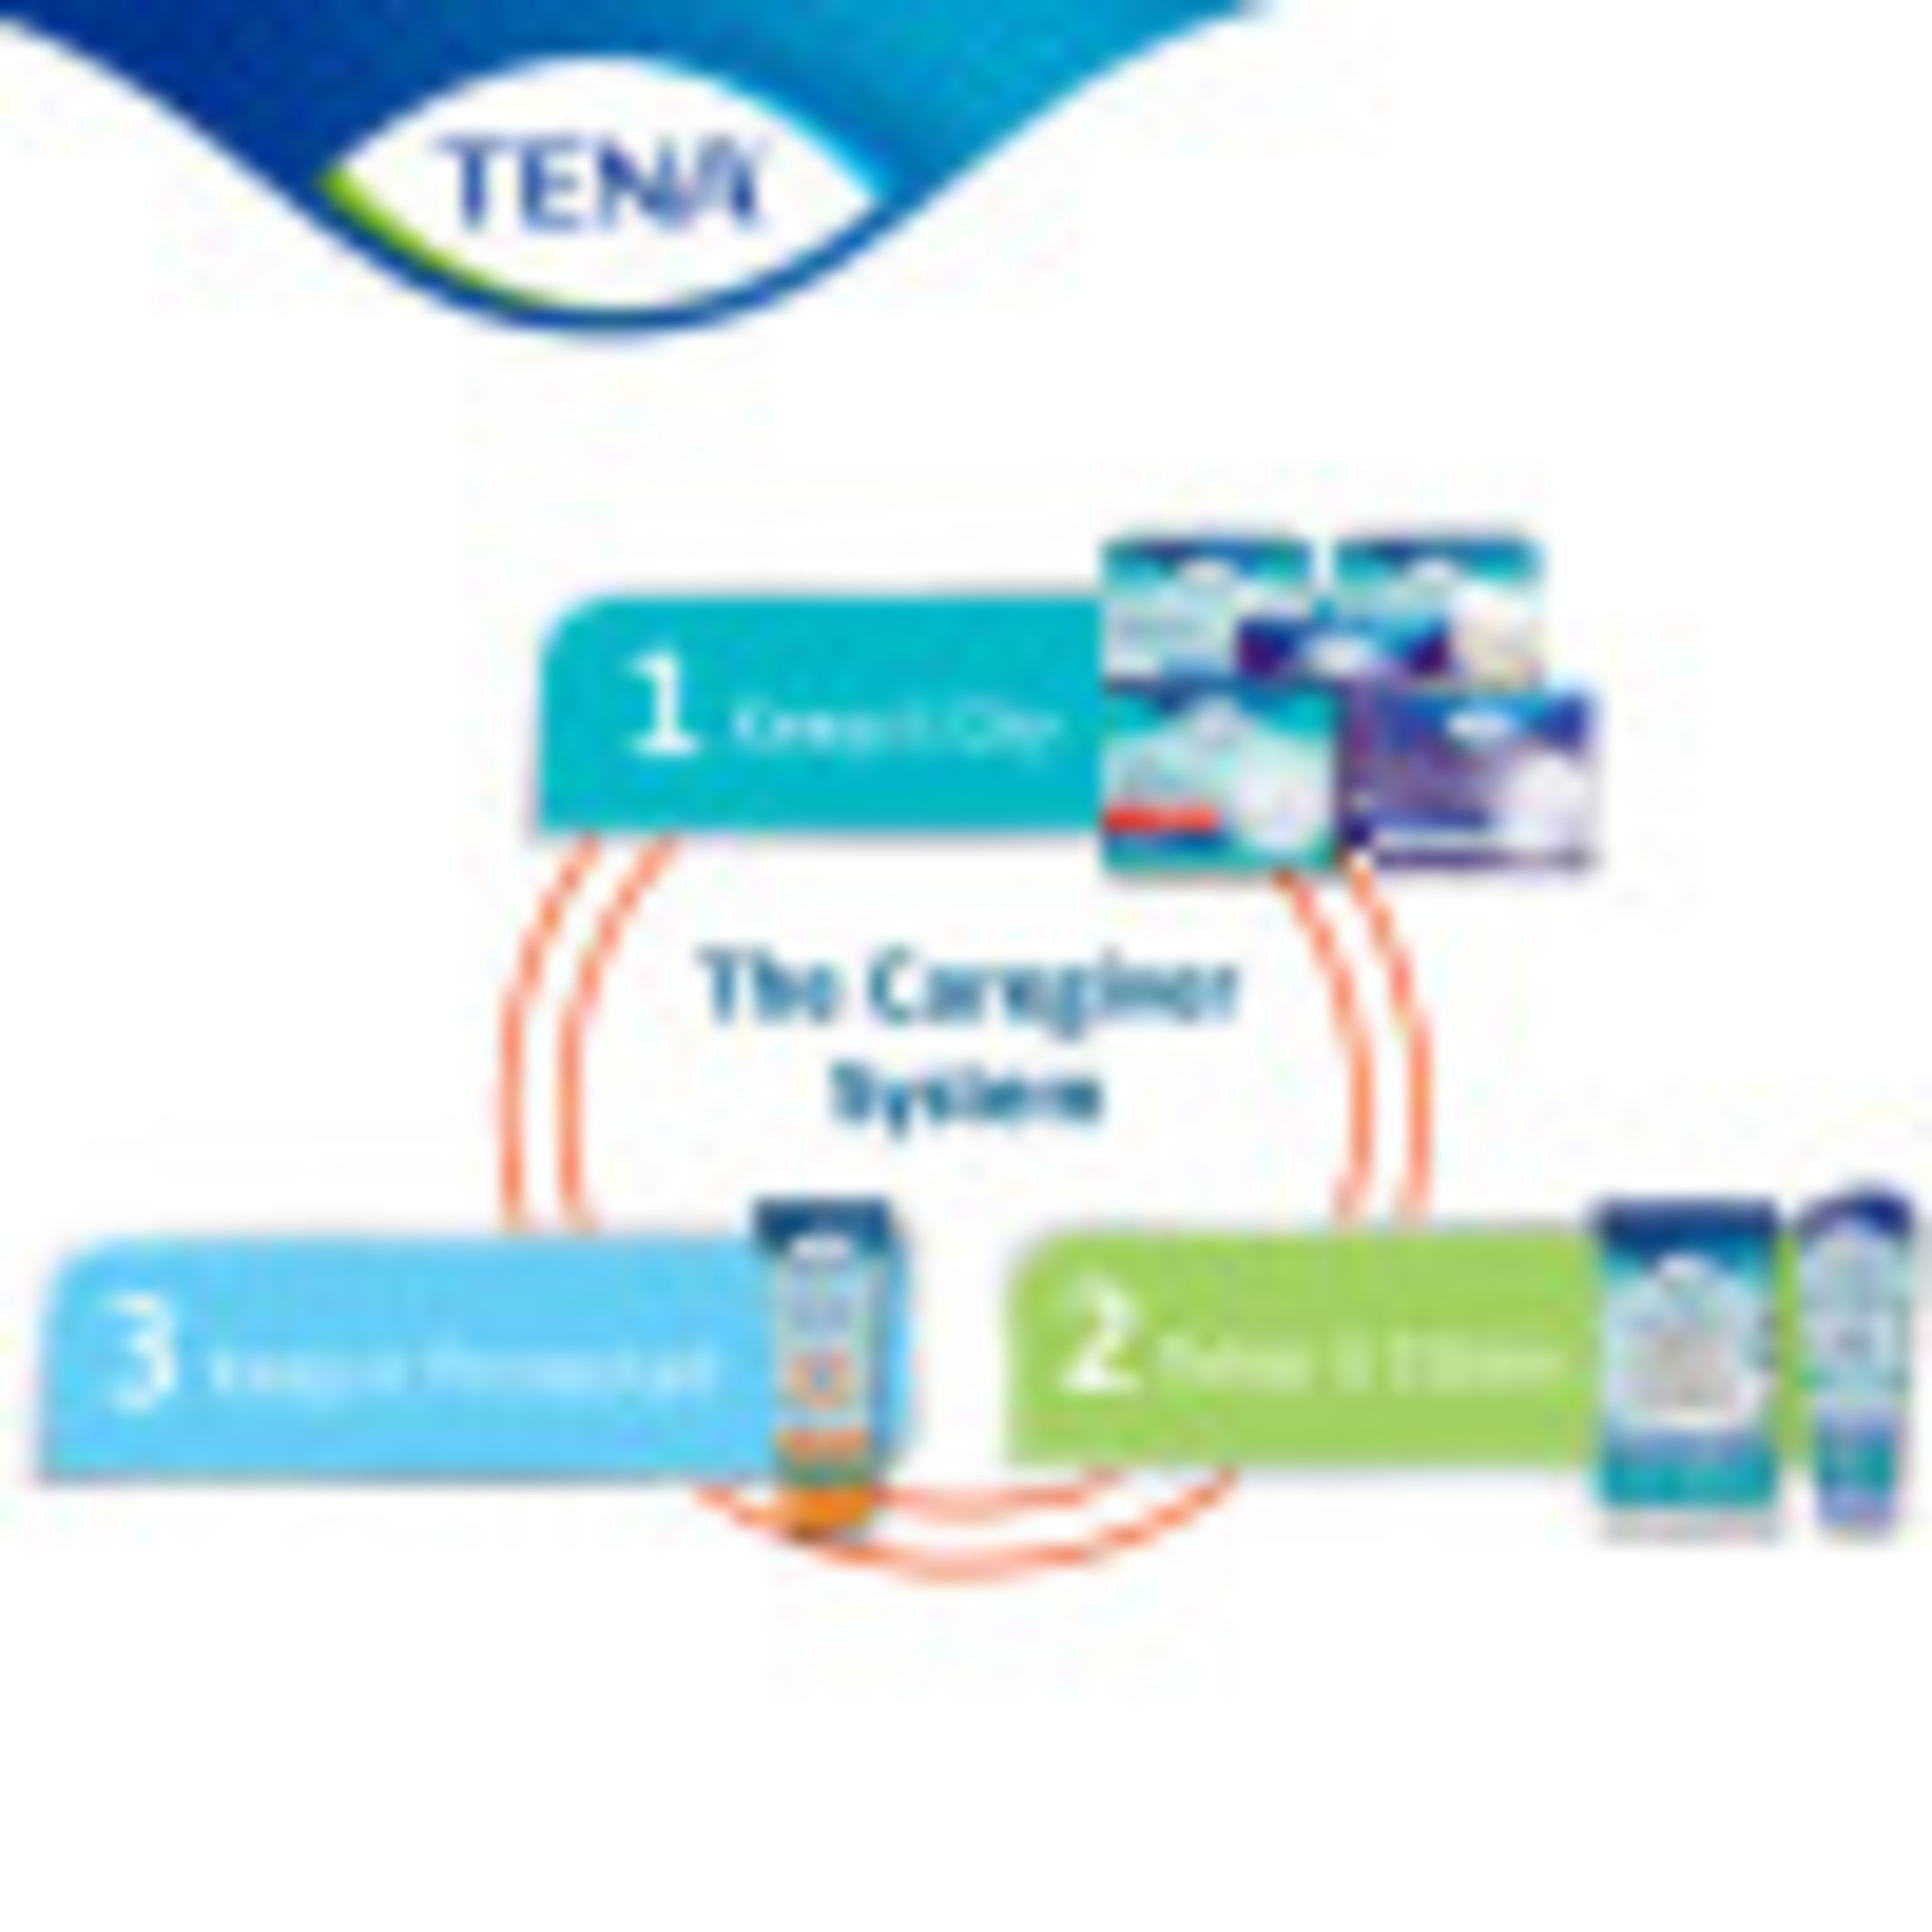 Tena ProSkin Ultra Adult Wipes, 48 Ct - image 5 of 8